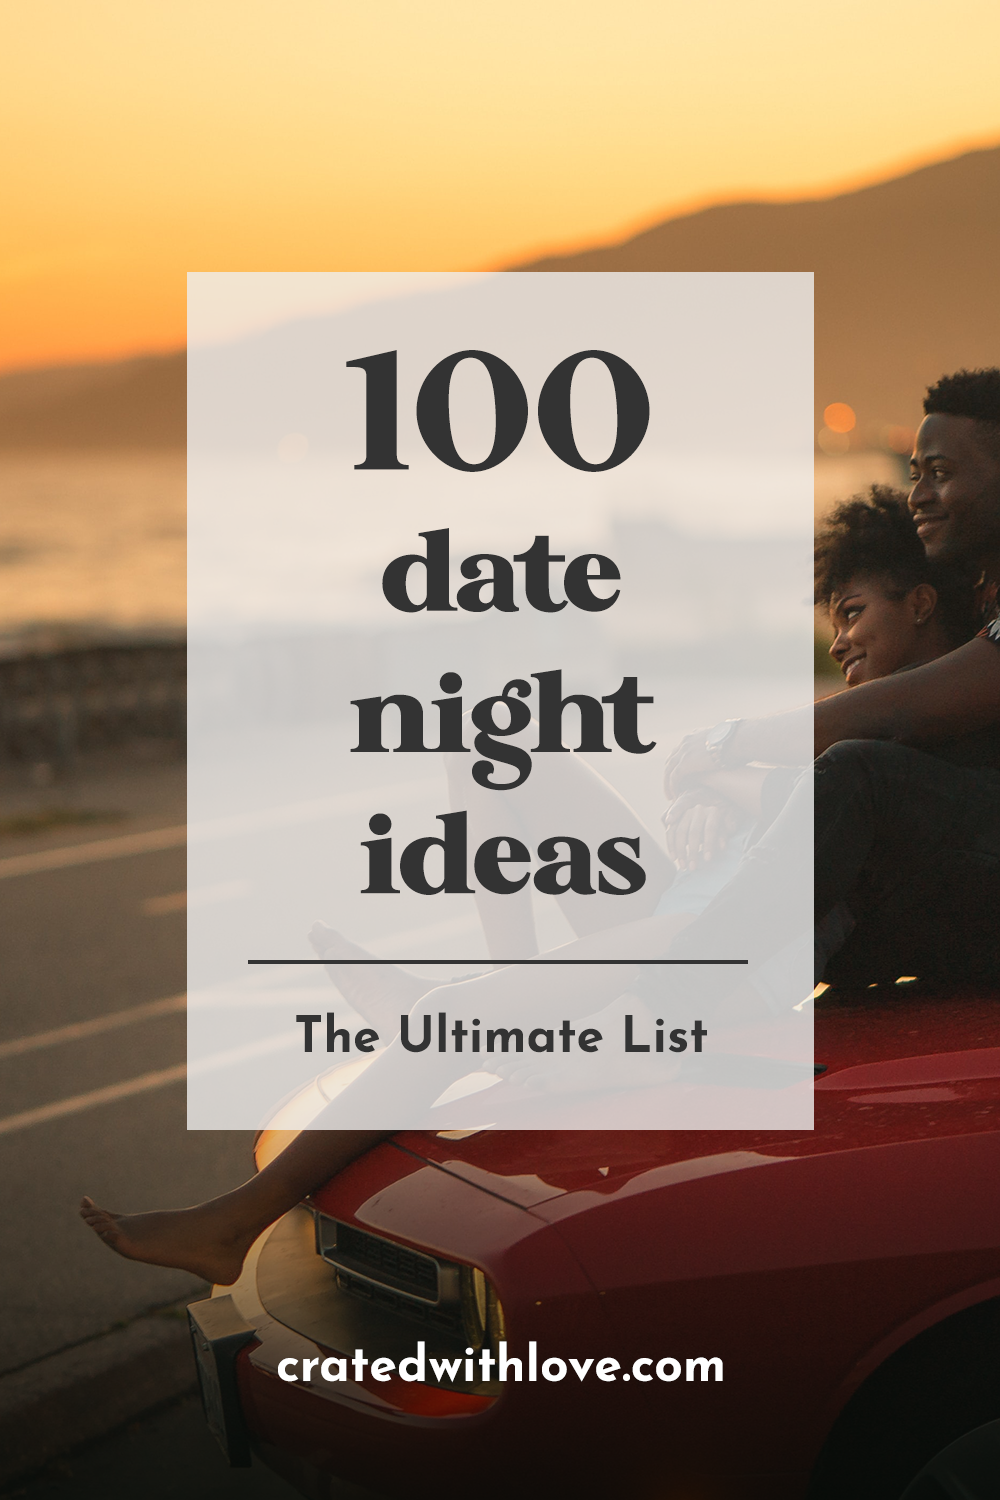 Pin on Date ideas